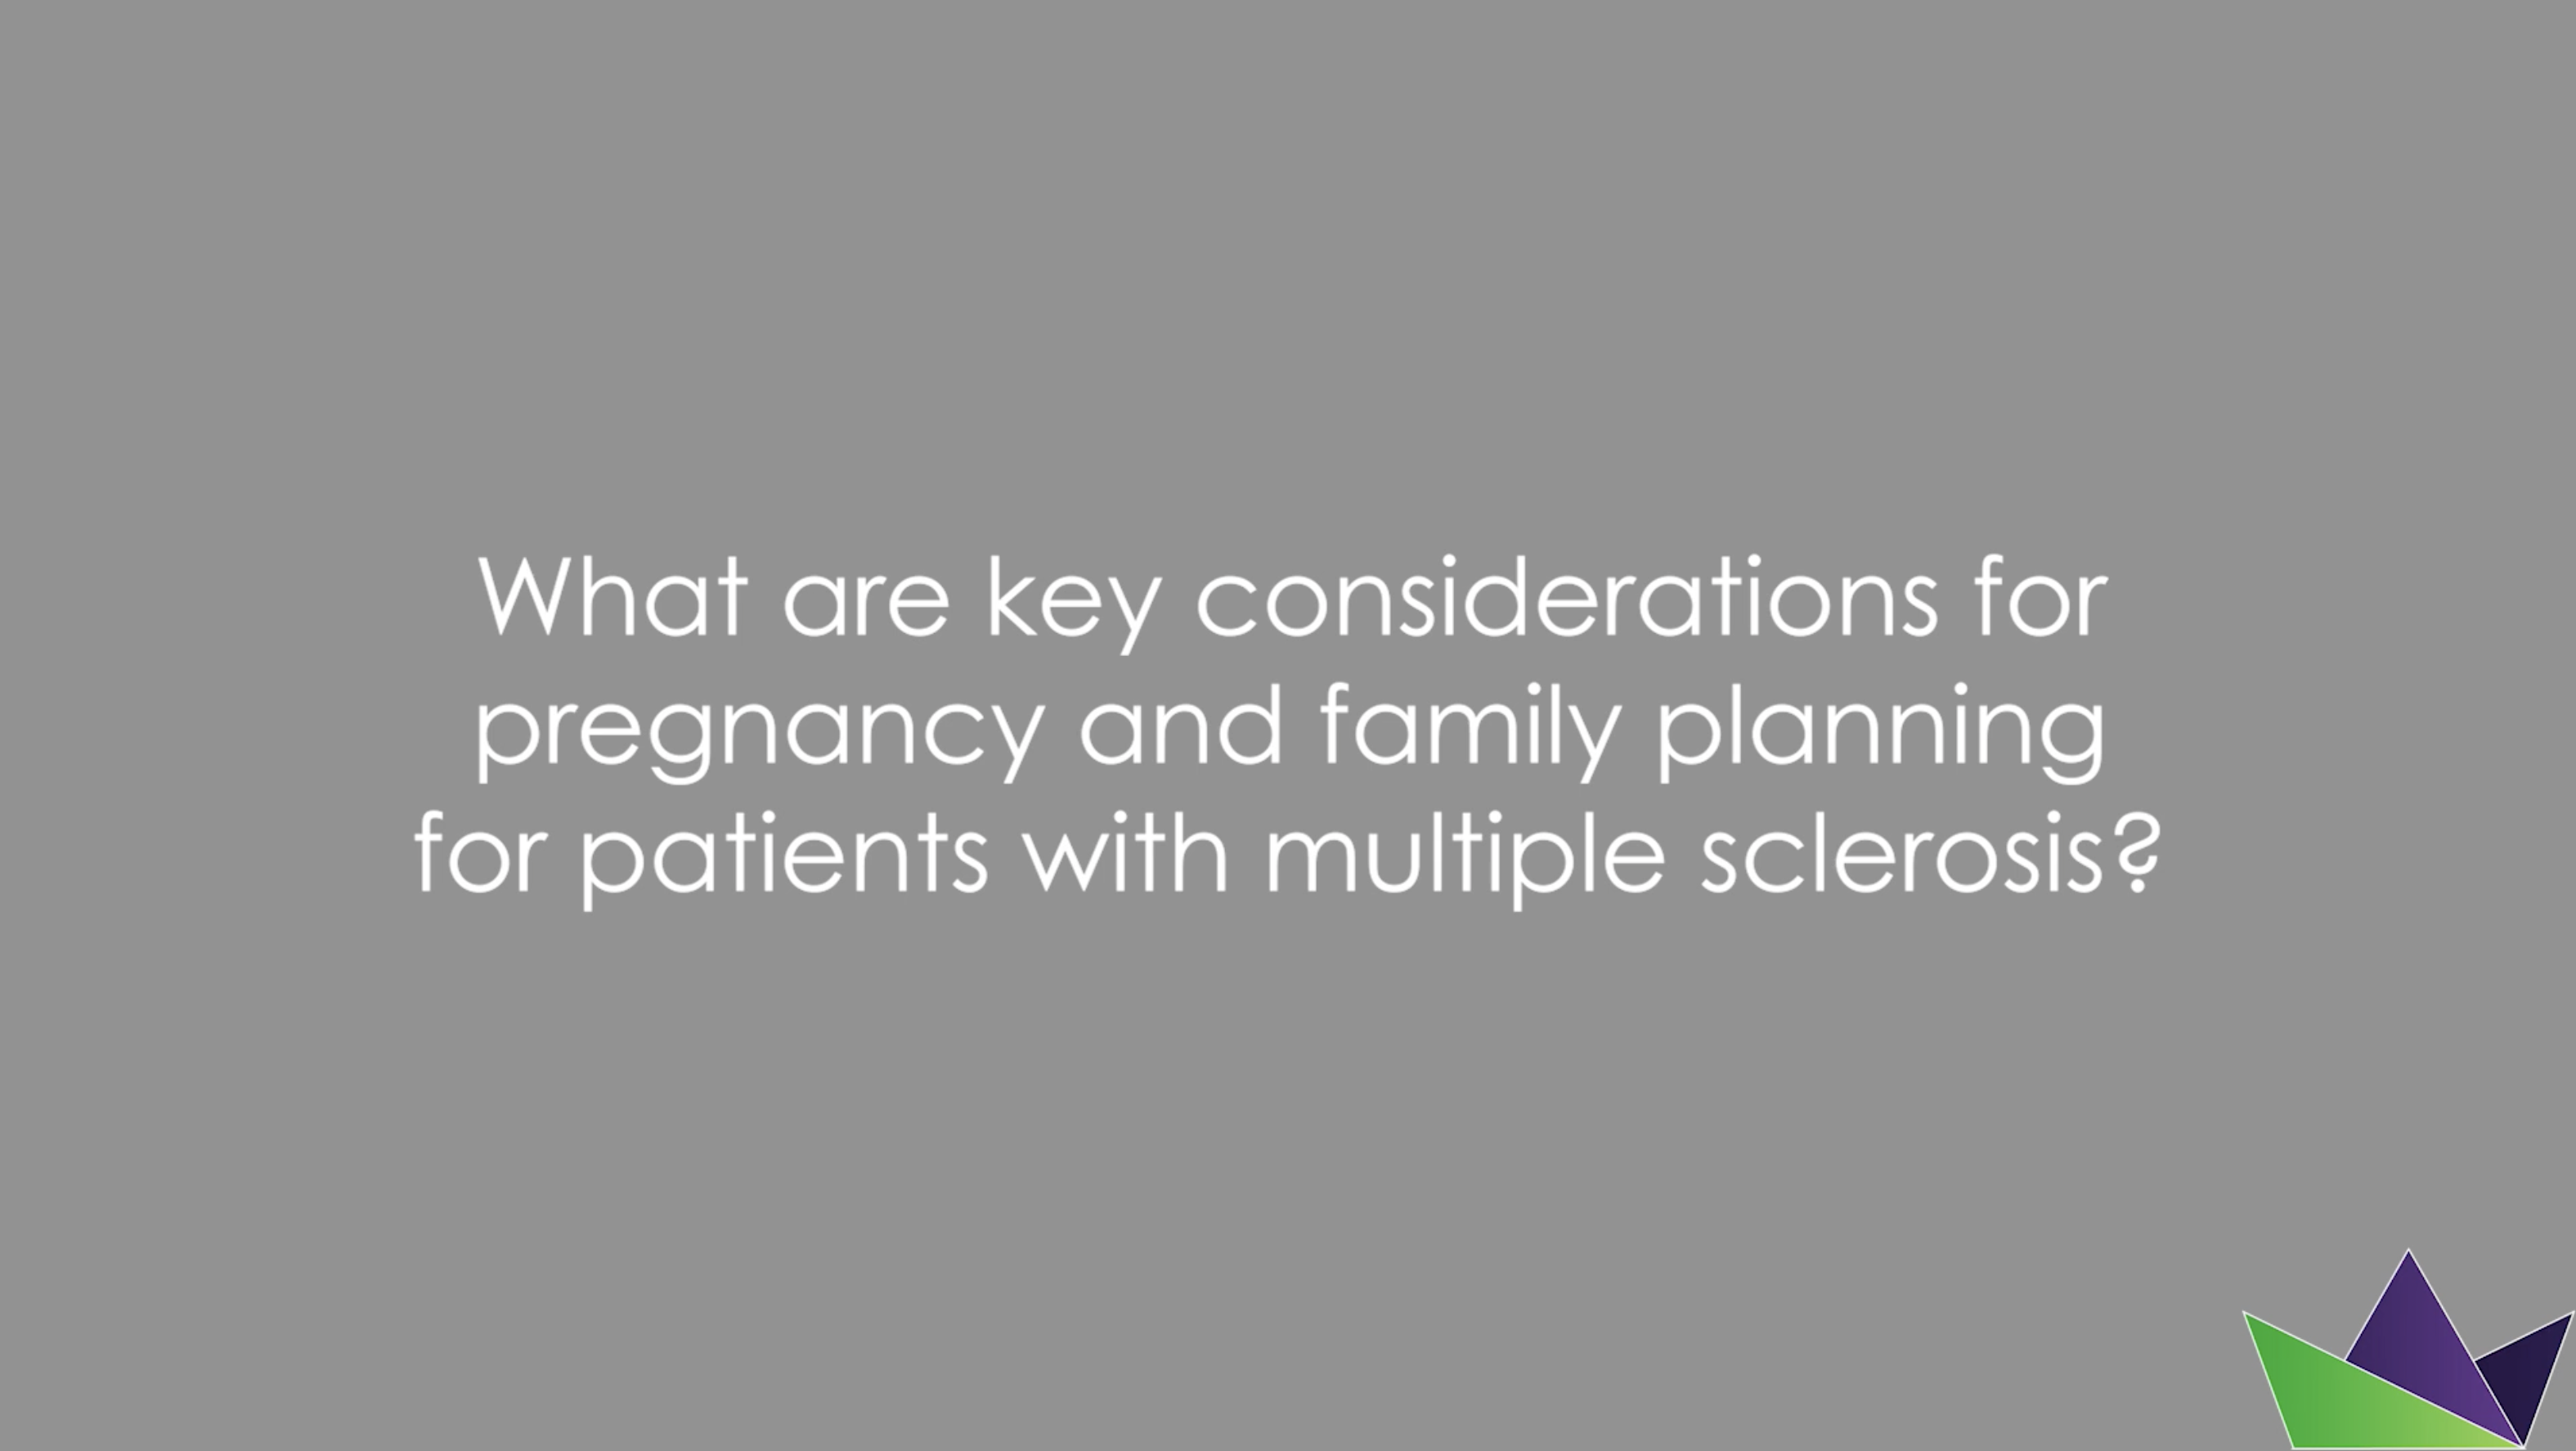 What are key considerations for pregnancy and family planning for patients with multiple sclerosis